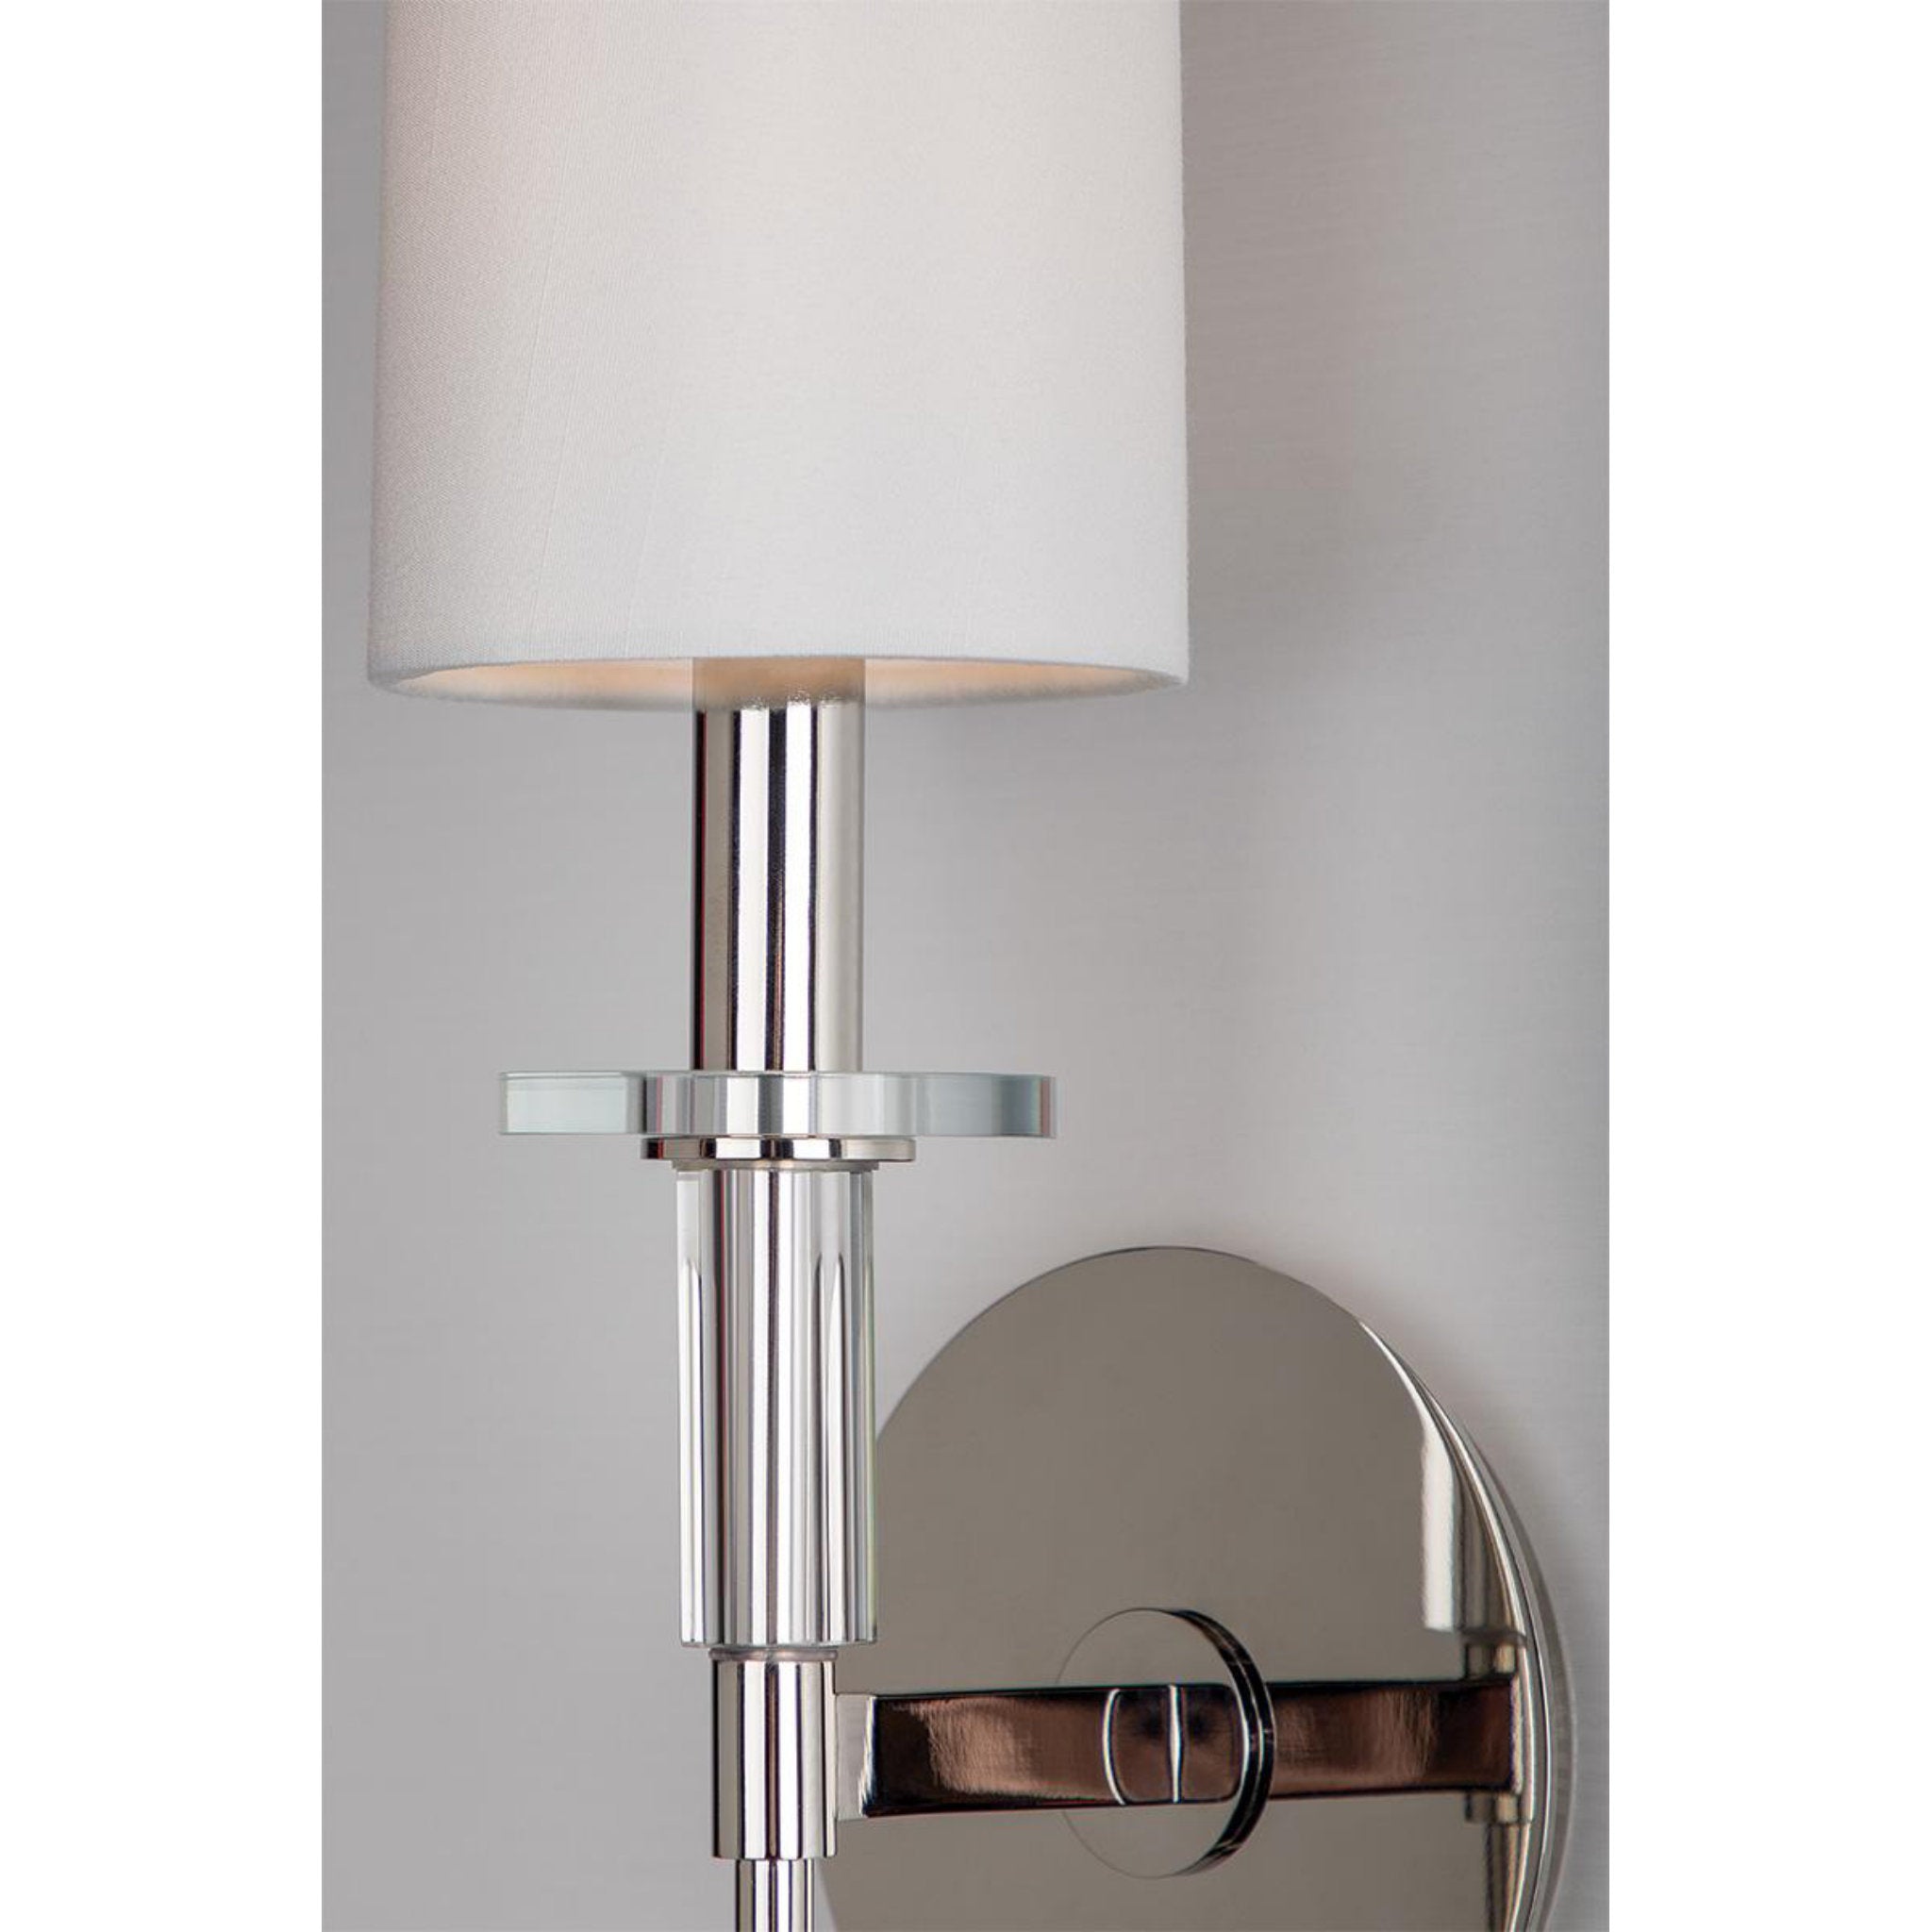 Amherst 1 Light Wall Sconce in Polished Nickel